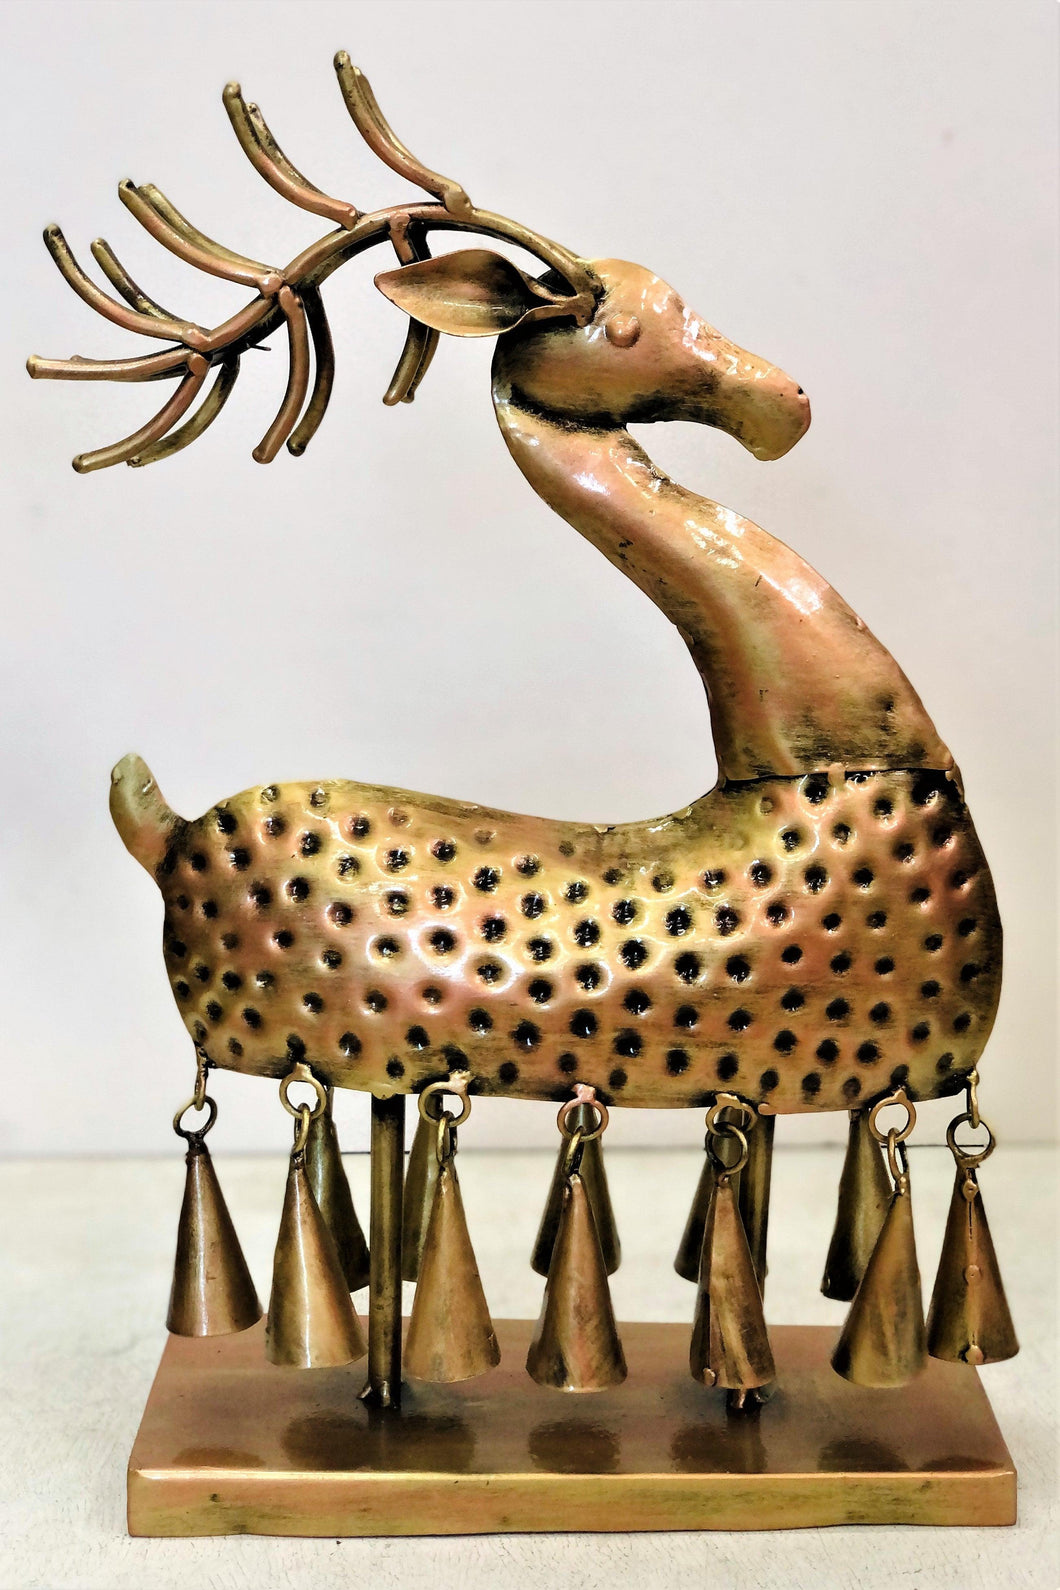 Majestic Deer Showpiece with 10 Harmonious Hanging Bells - Style It by Hanika